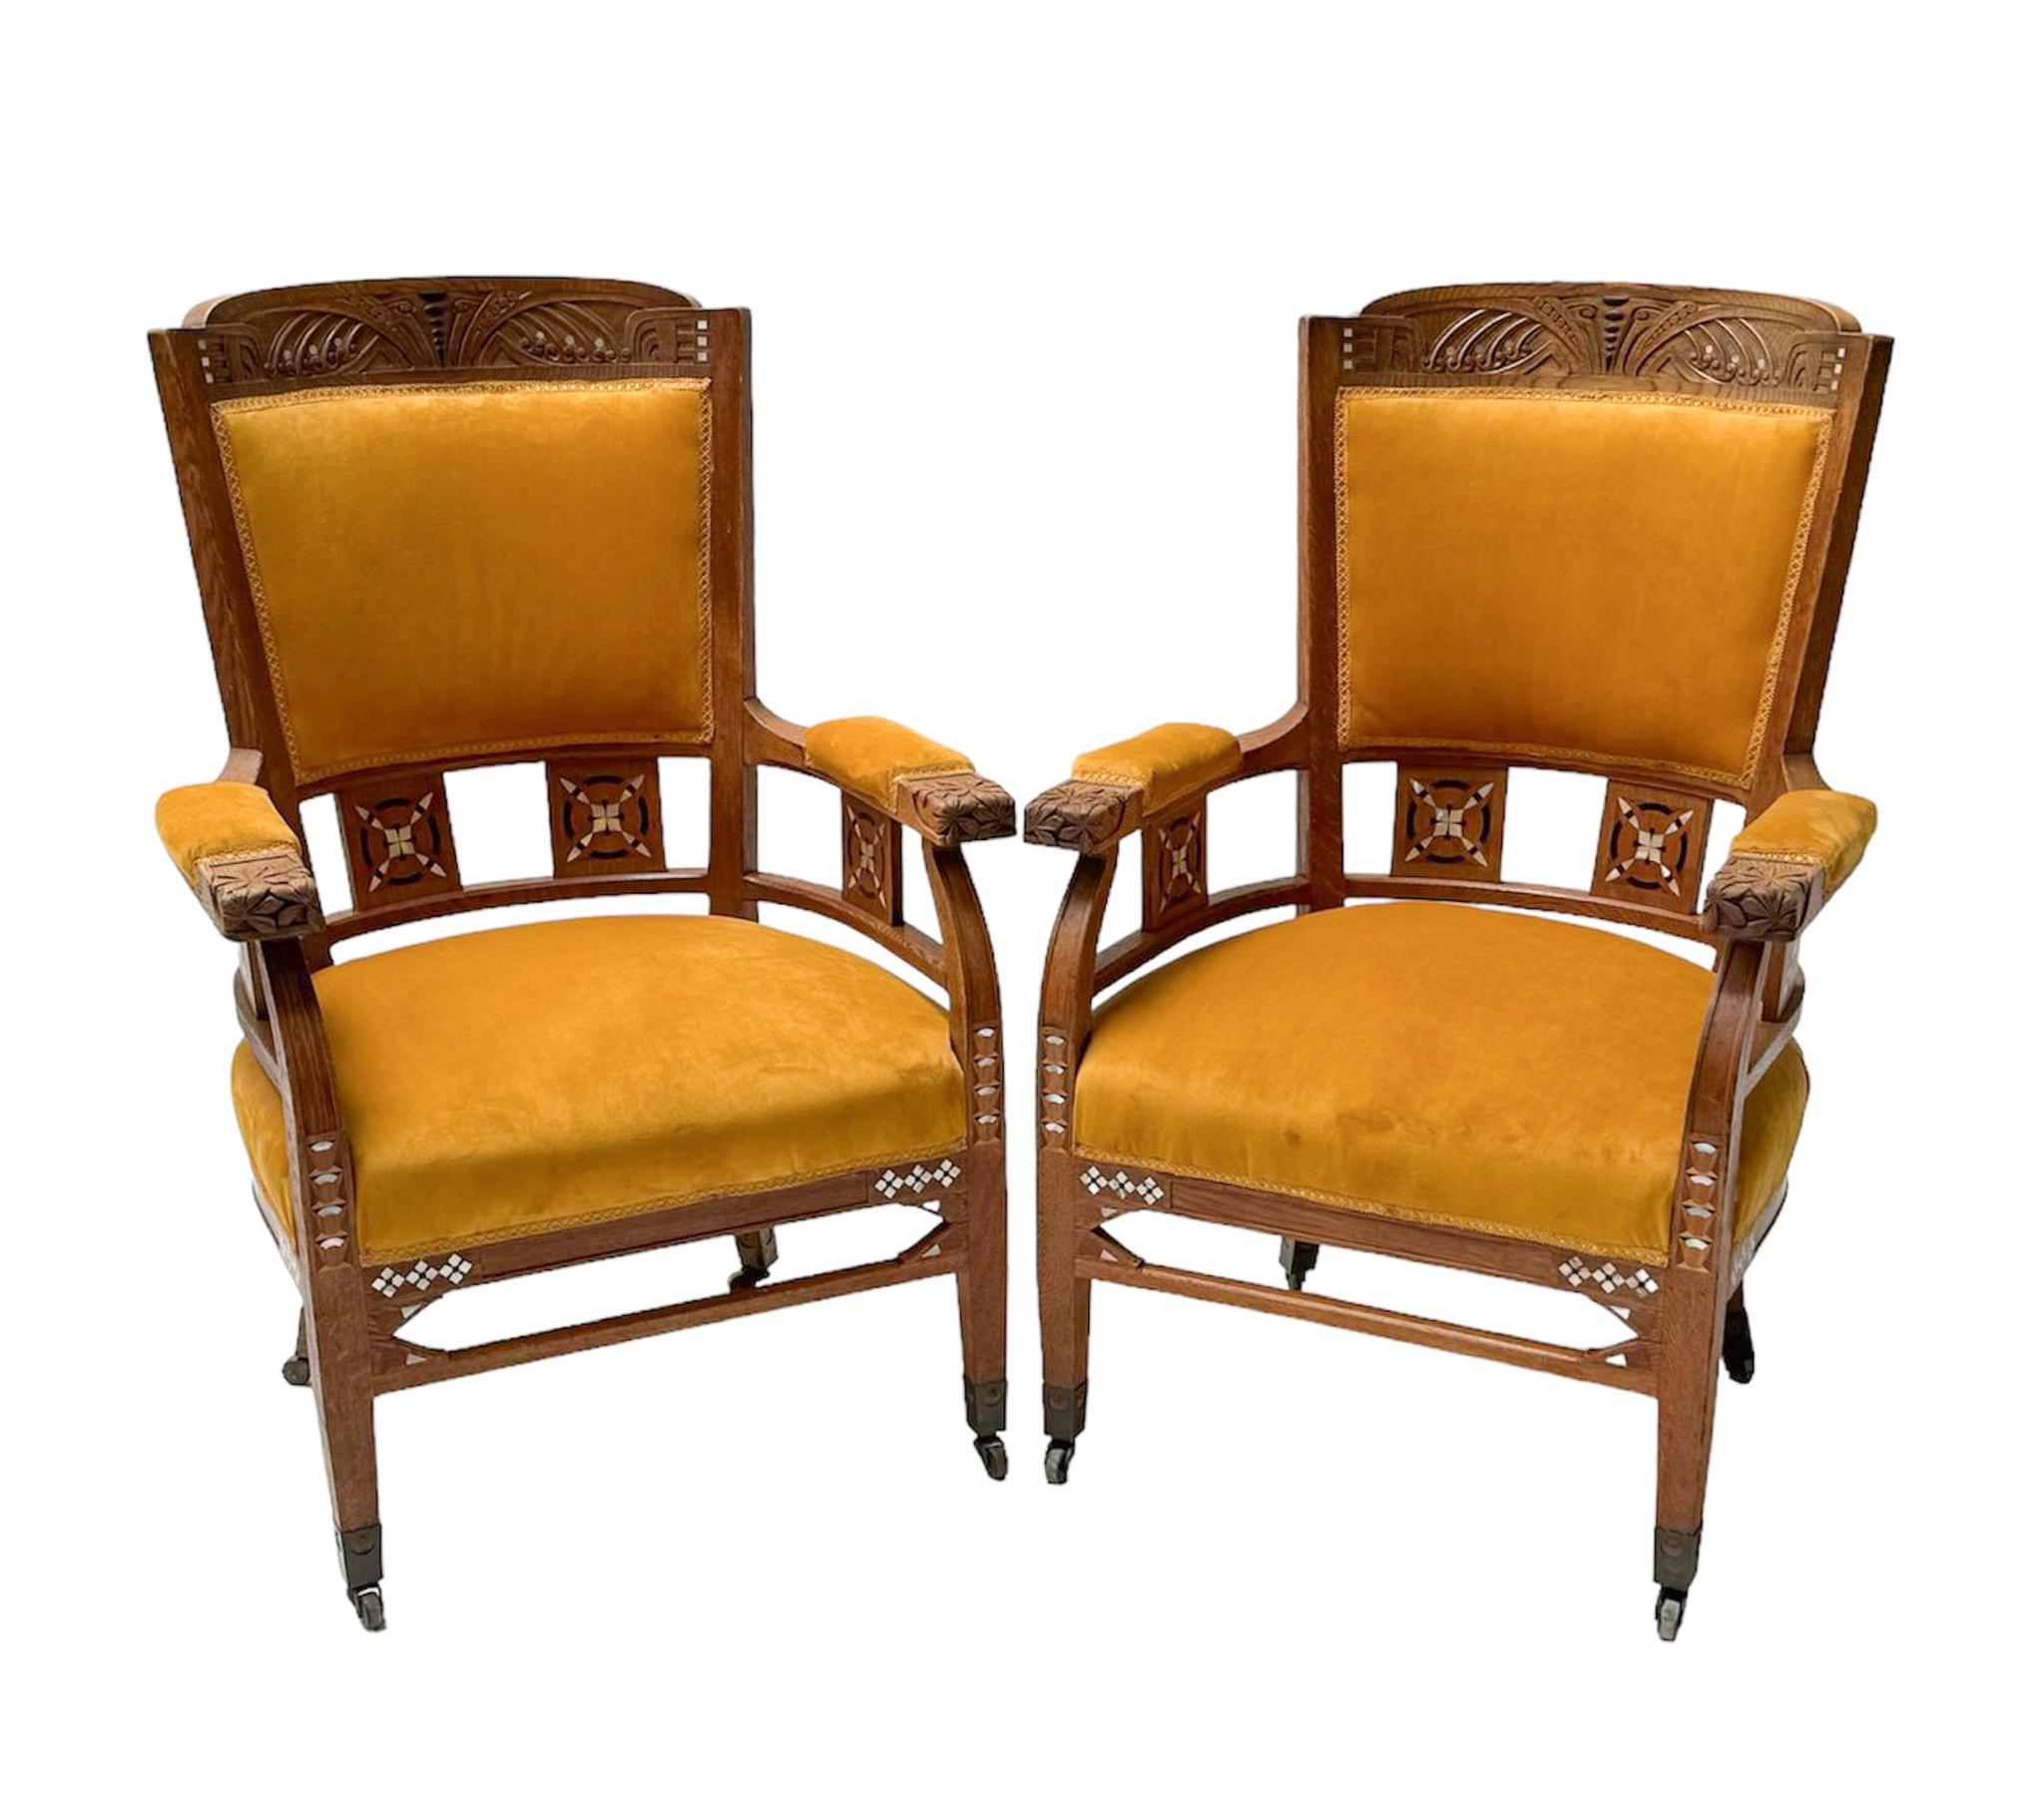 Magnificent and ultra rare pair of Art Nouveau Arts & Crafts armchairs.
Design by Royal H.F. Jansen & Zonen Amsterdam.
Striking Dutch design from the 1900s.
Solid oak frames with original hand-carved elements and inlay.
Re-upholstered with velvet